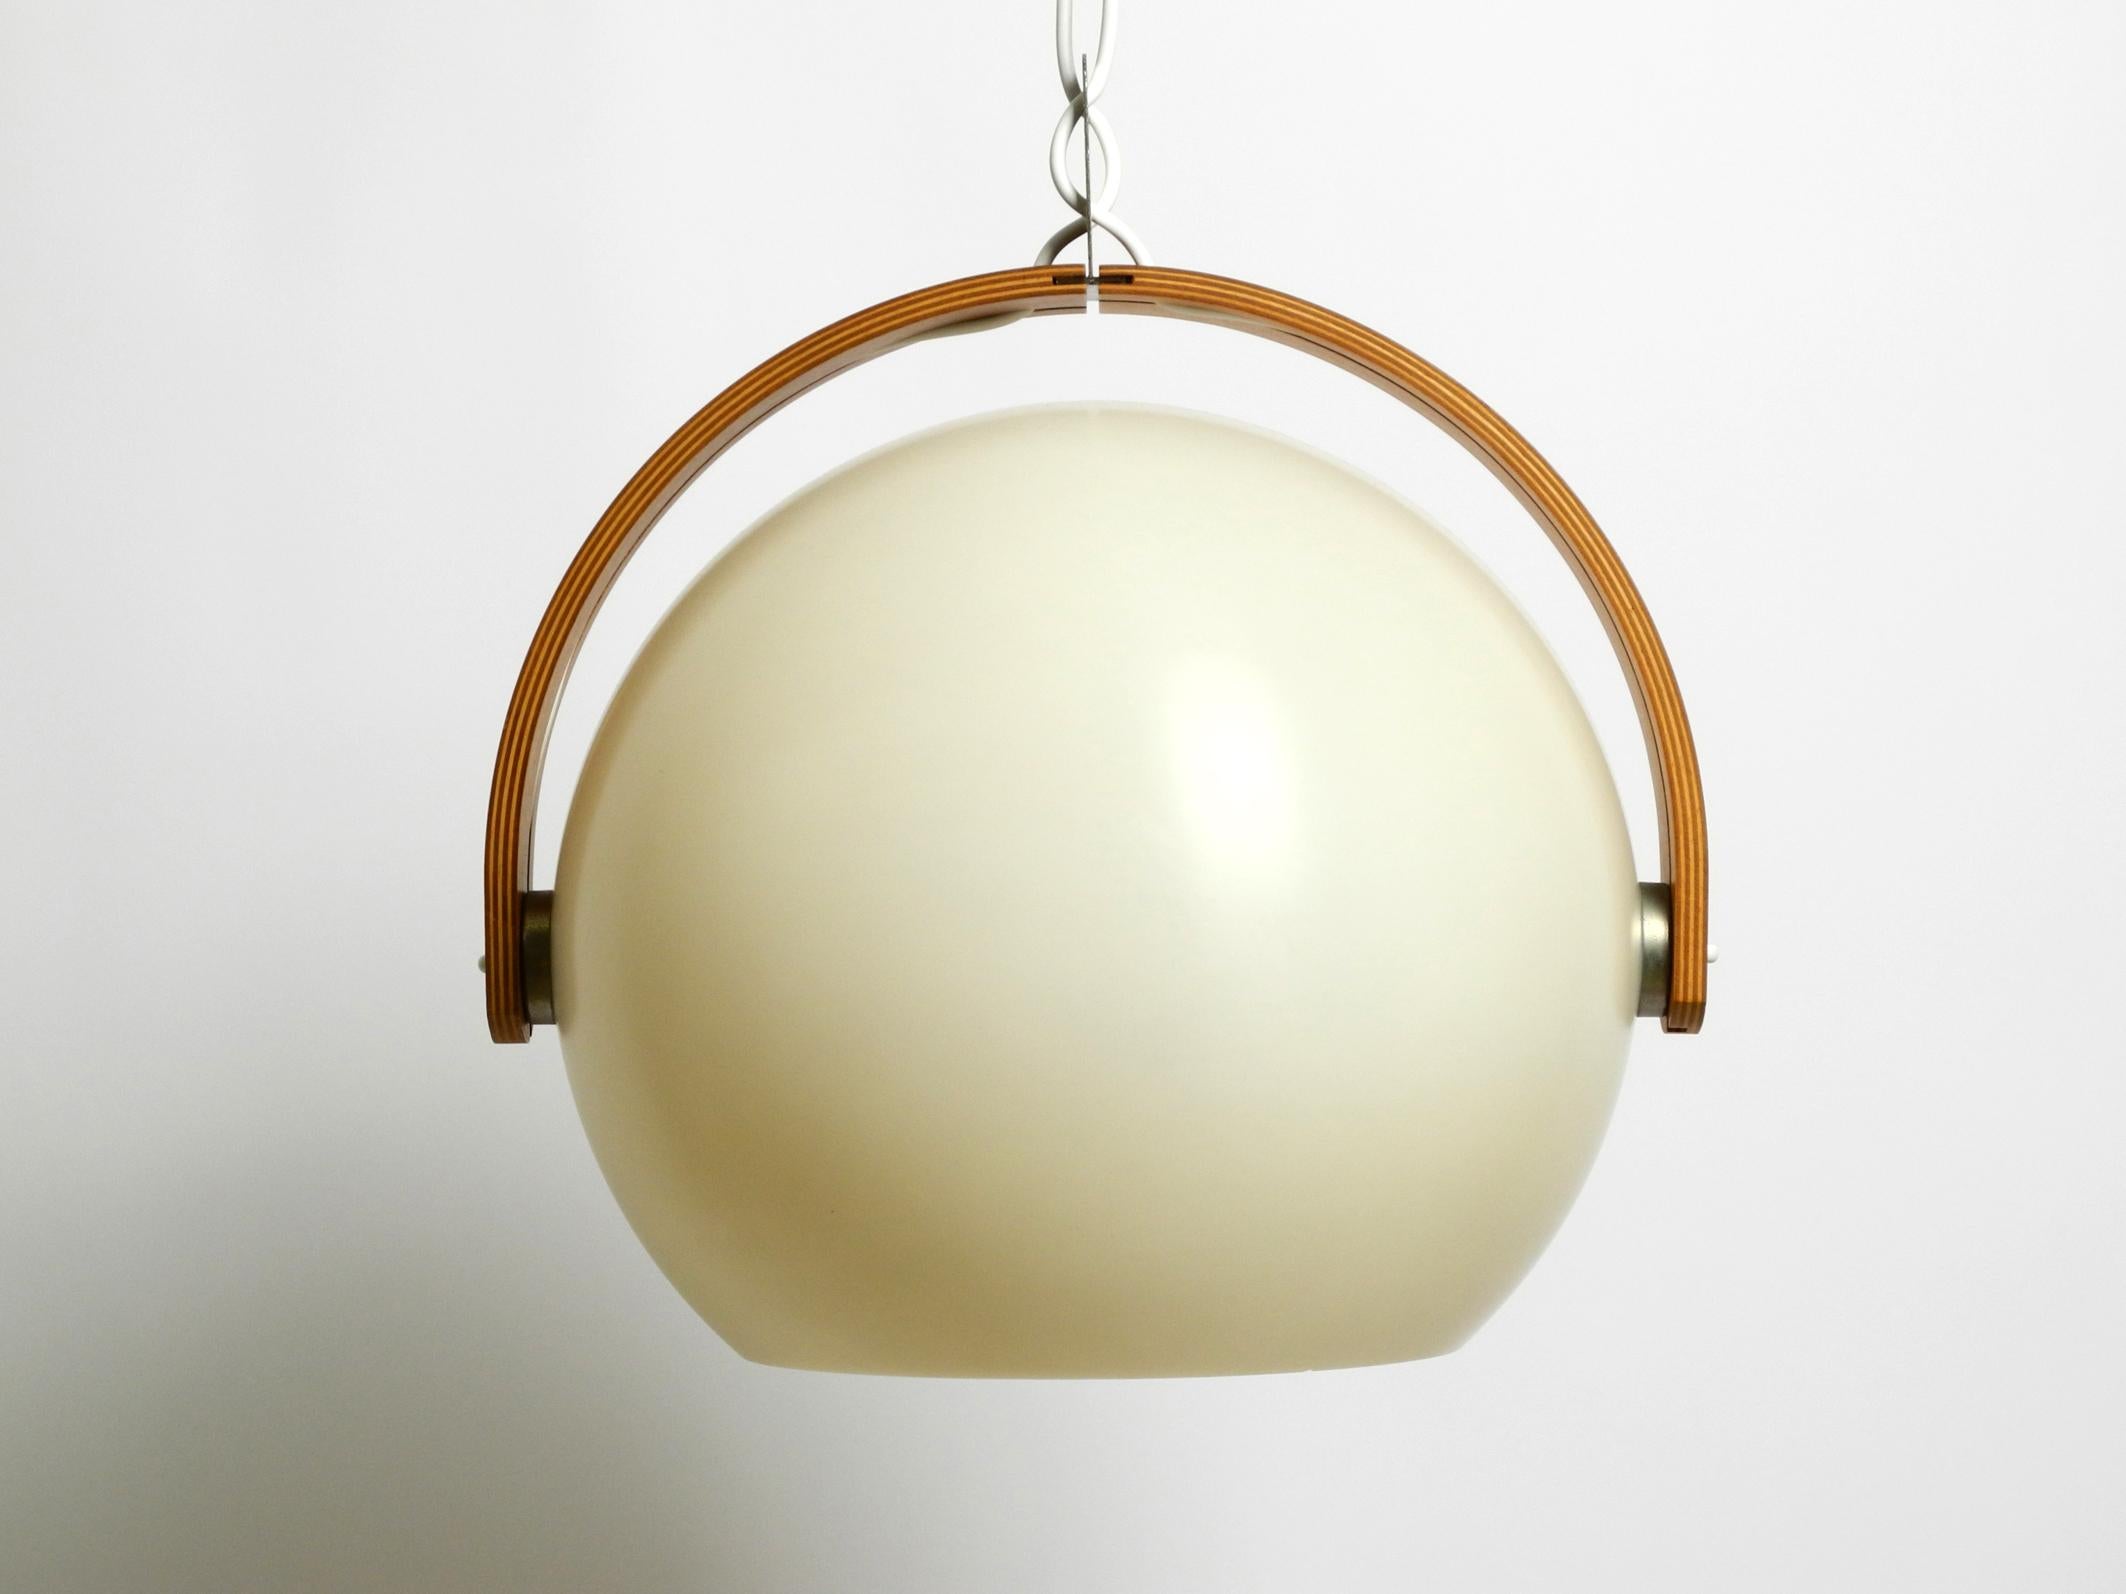 60s Temde Space Age pendant lamp with teak plywood and a sperical lampshade In Good Condition For Sale In München, DE